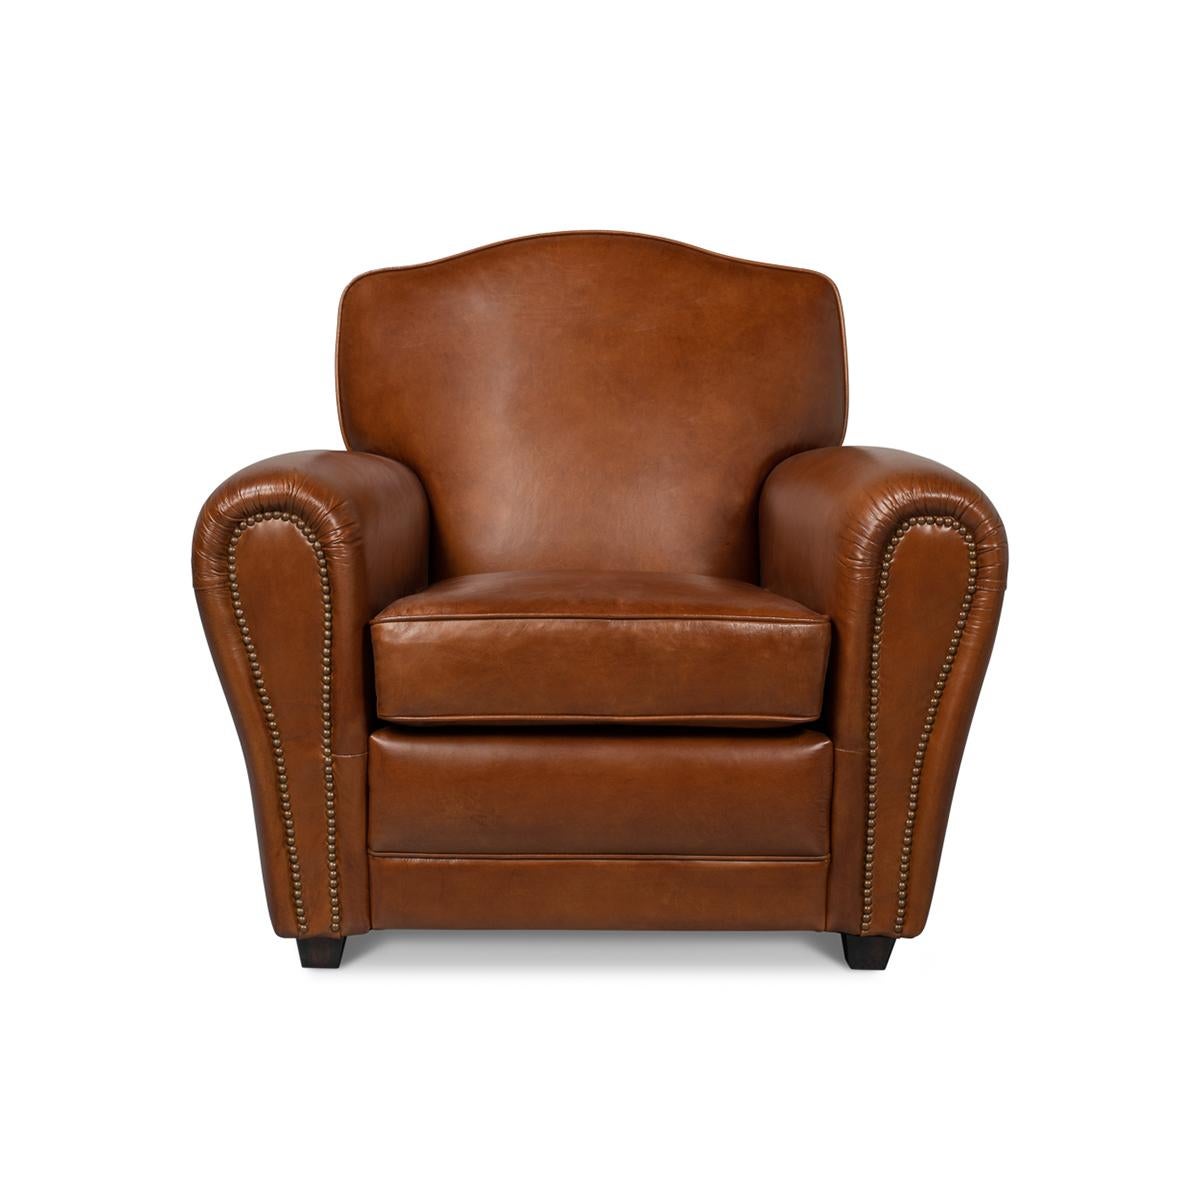 French Art Deco Style club chairs, upholstered with top-grain vintage Havana brown leather with a deep padded upholstered backrest and seat cushion, with boldly rolled arms and raised on square feet.

Dimensions: 36